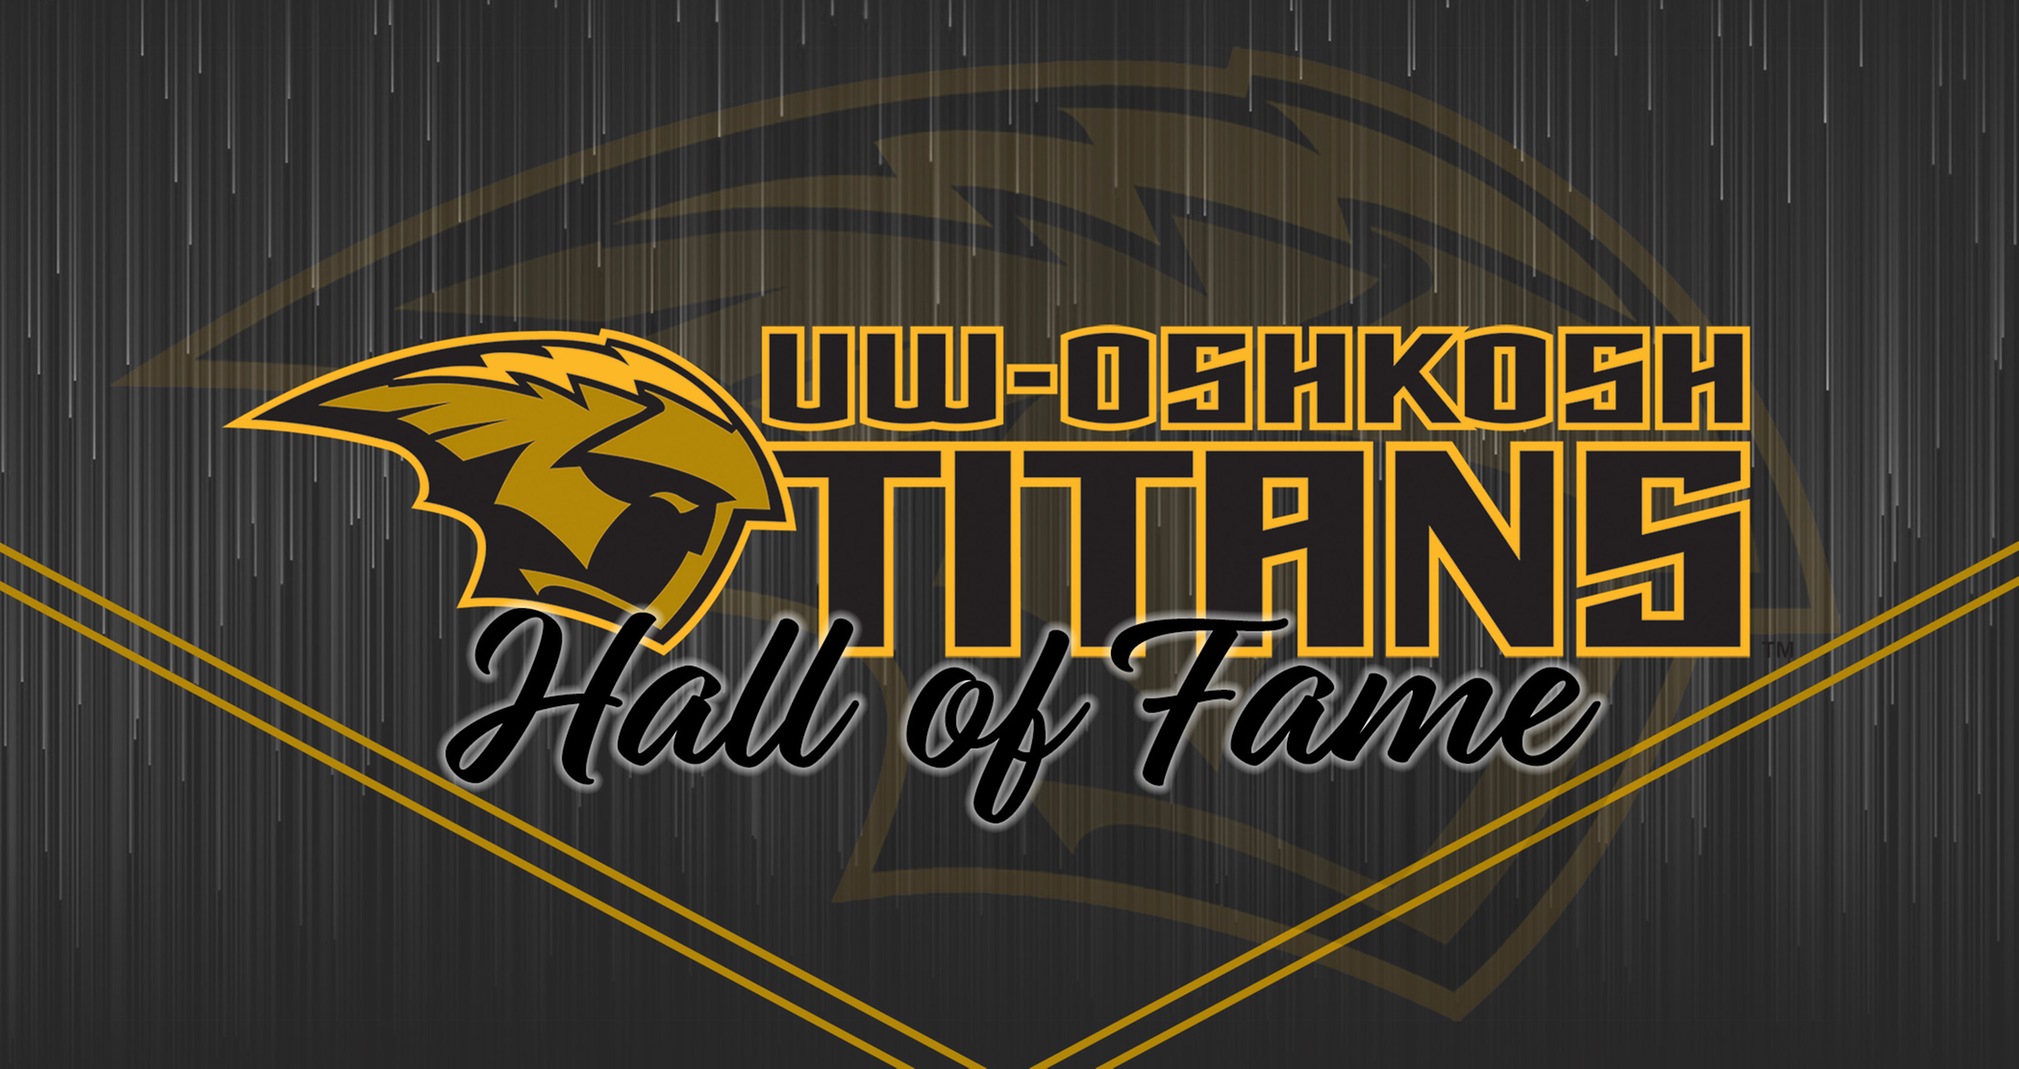 UW-Oshkosh Hall of Fame To Induct New Members in October